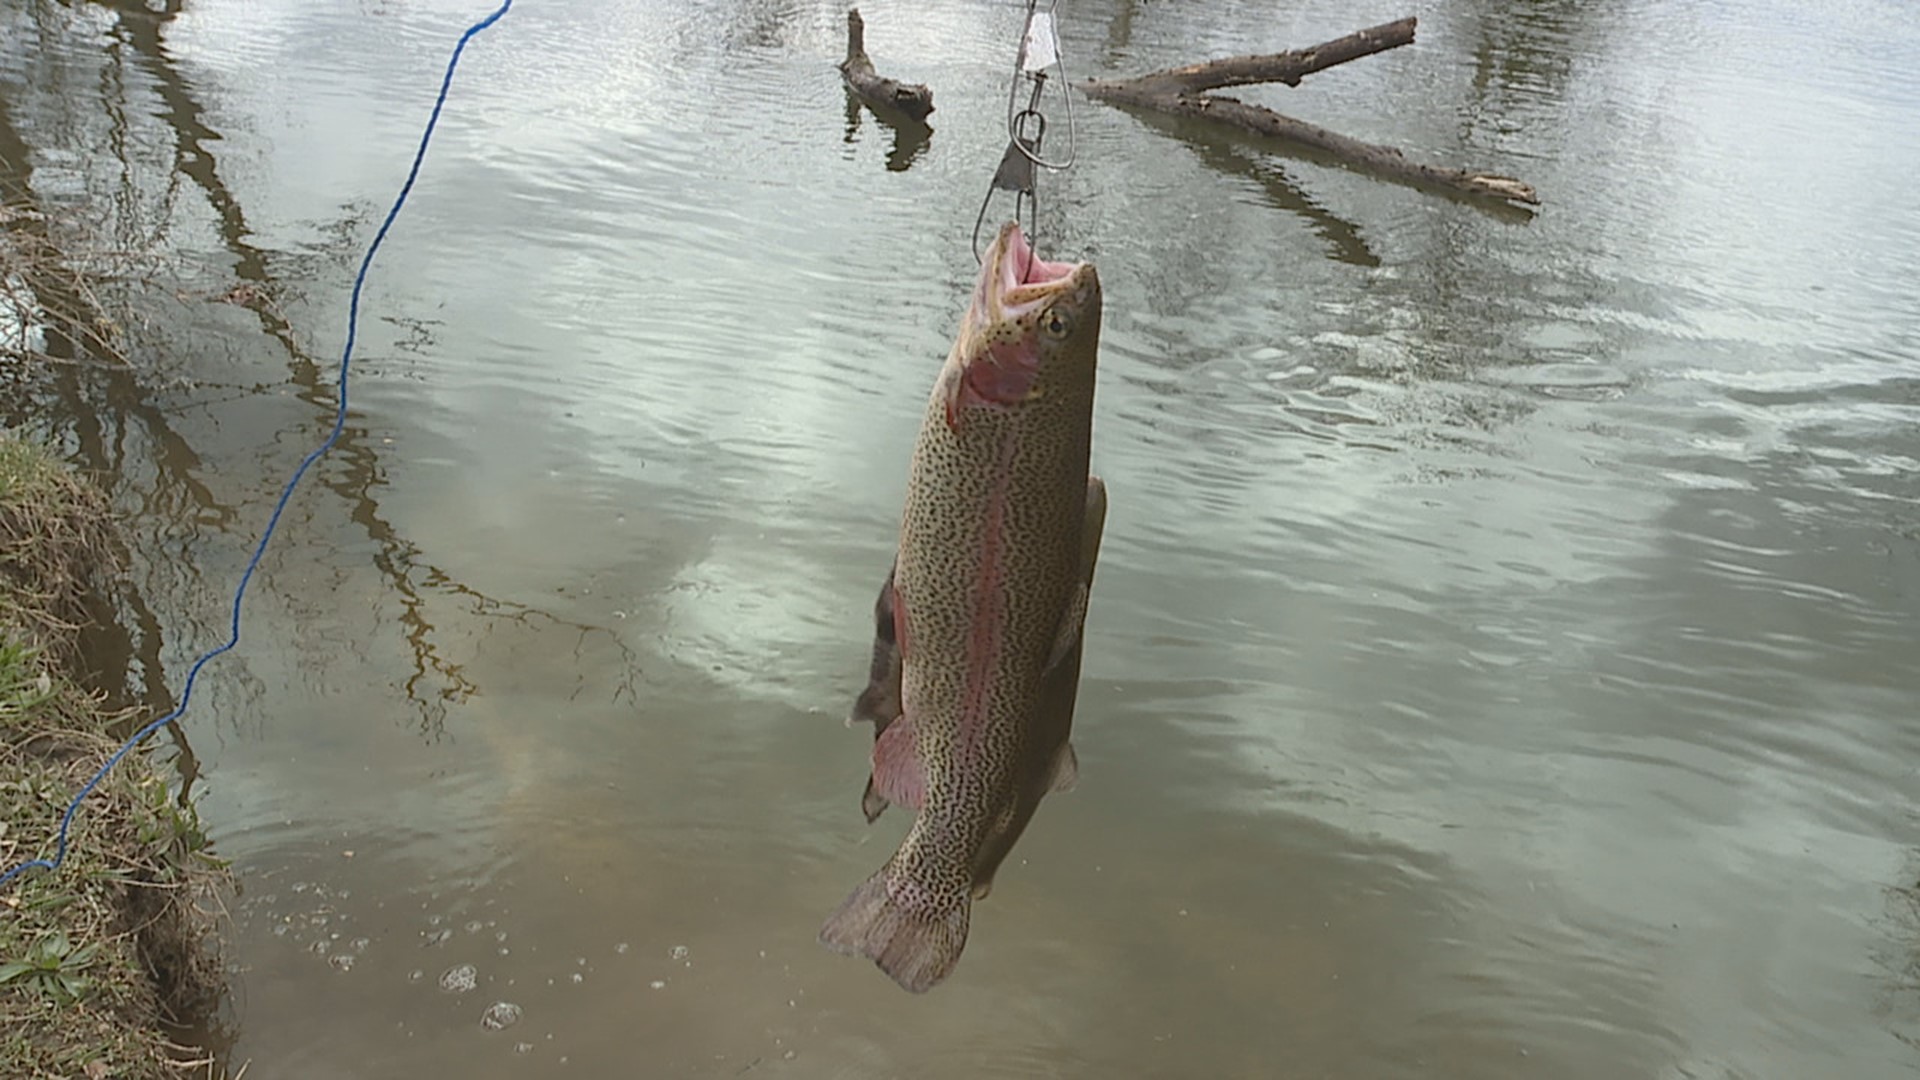 Podcast: Episode 324, Trout Fishing in Pennsylvania - Harvesting Nature